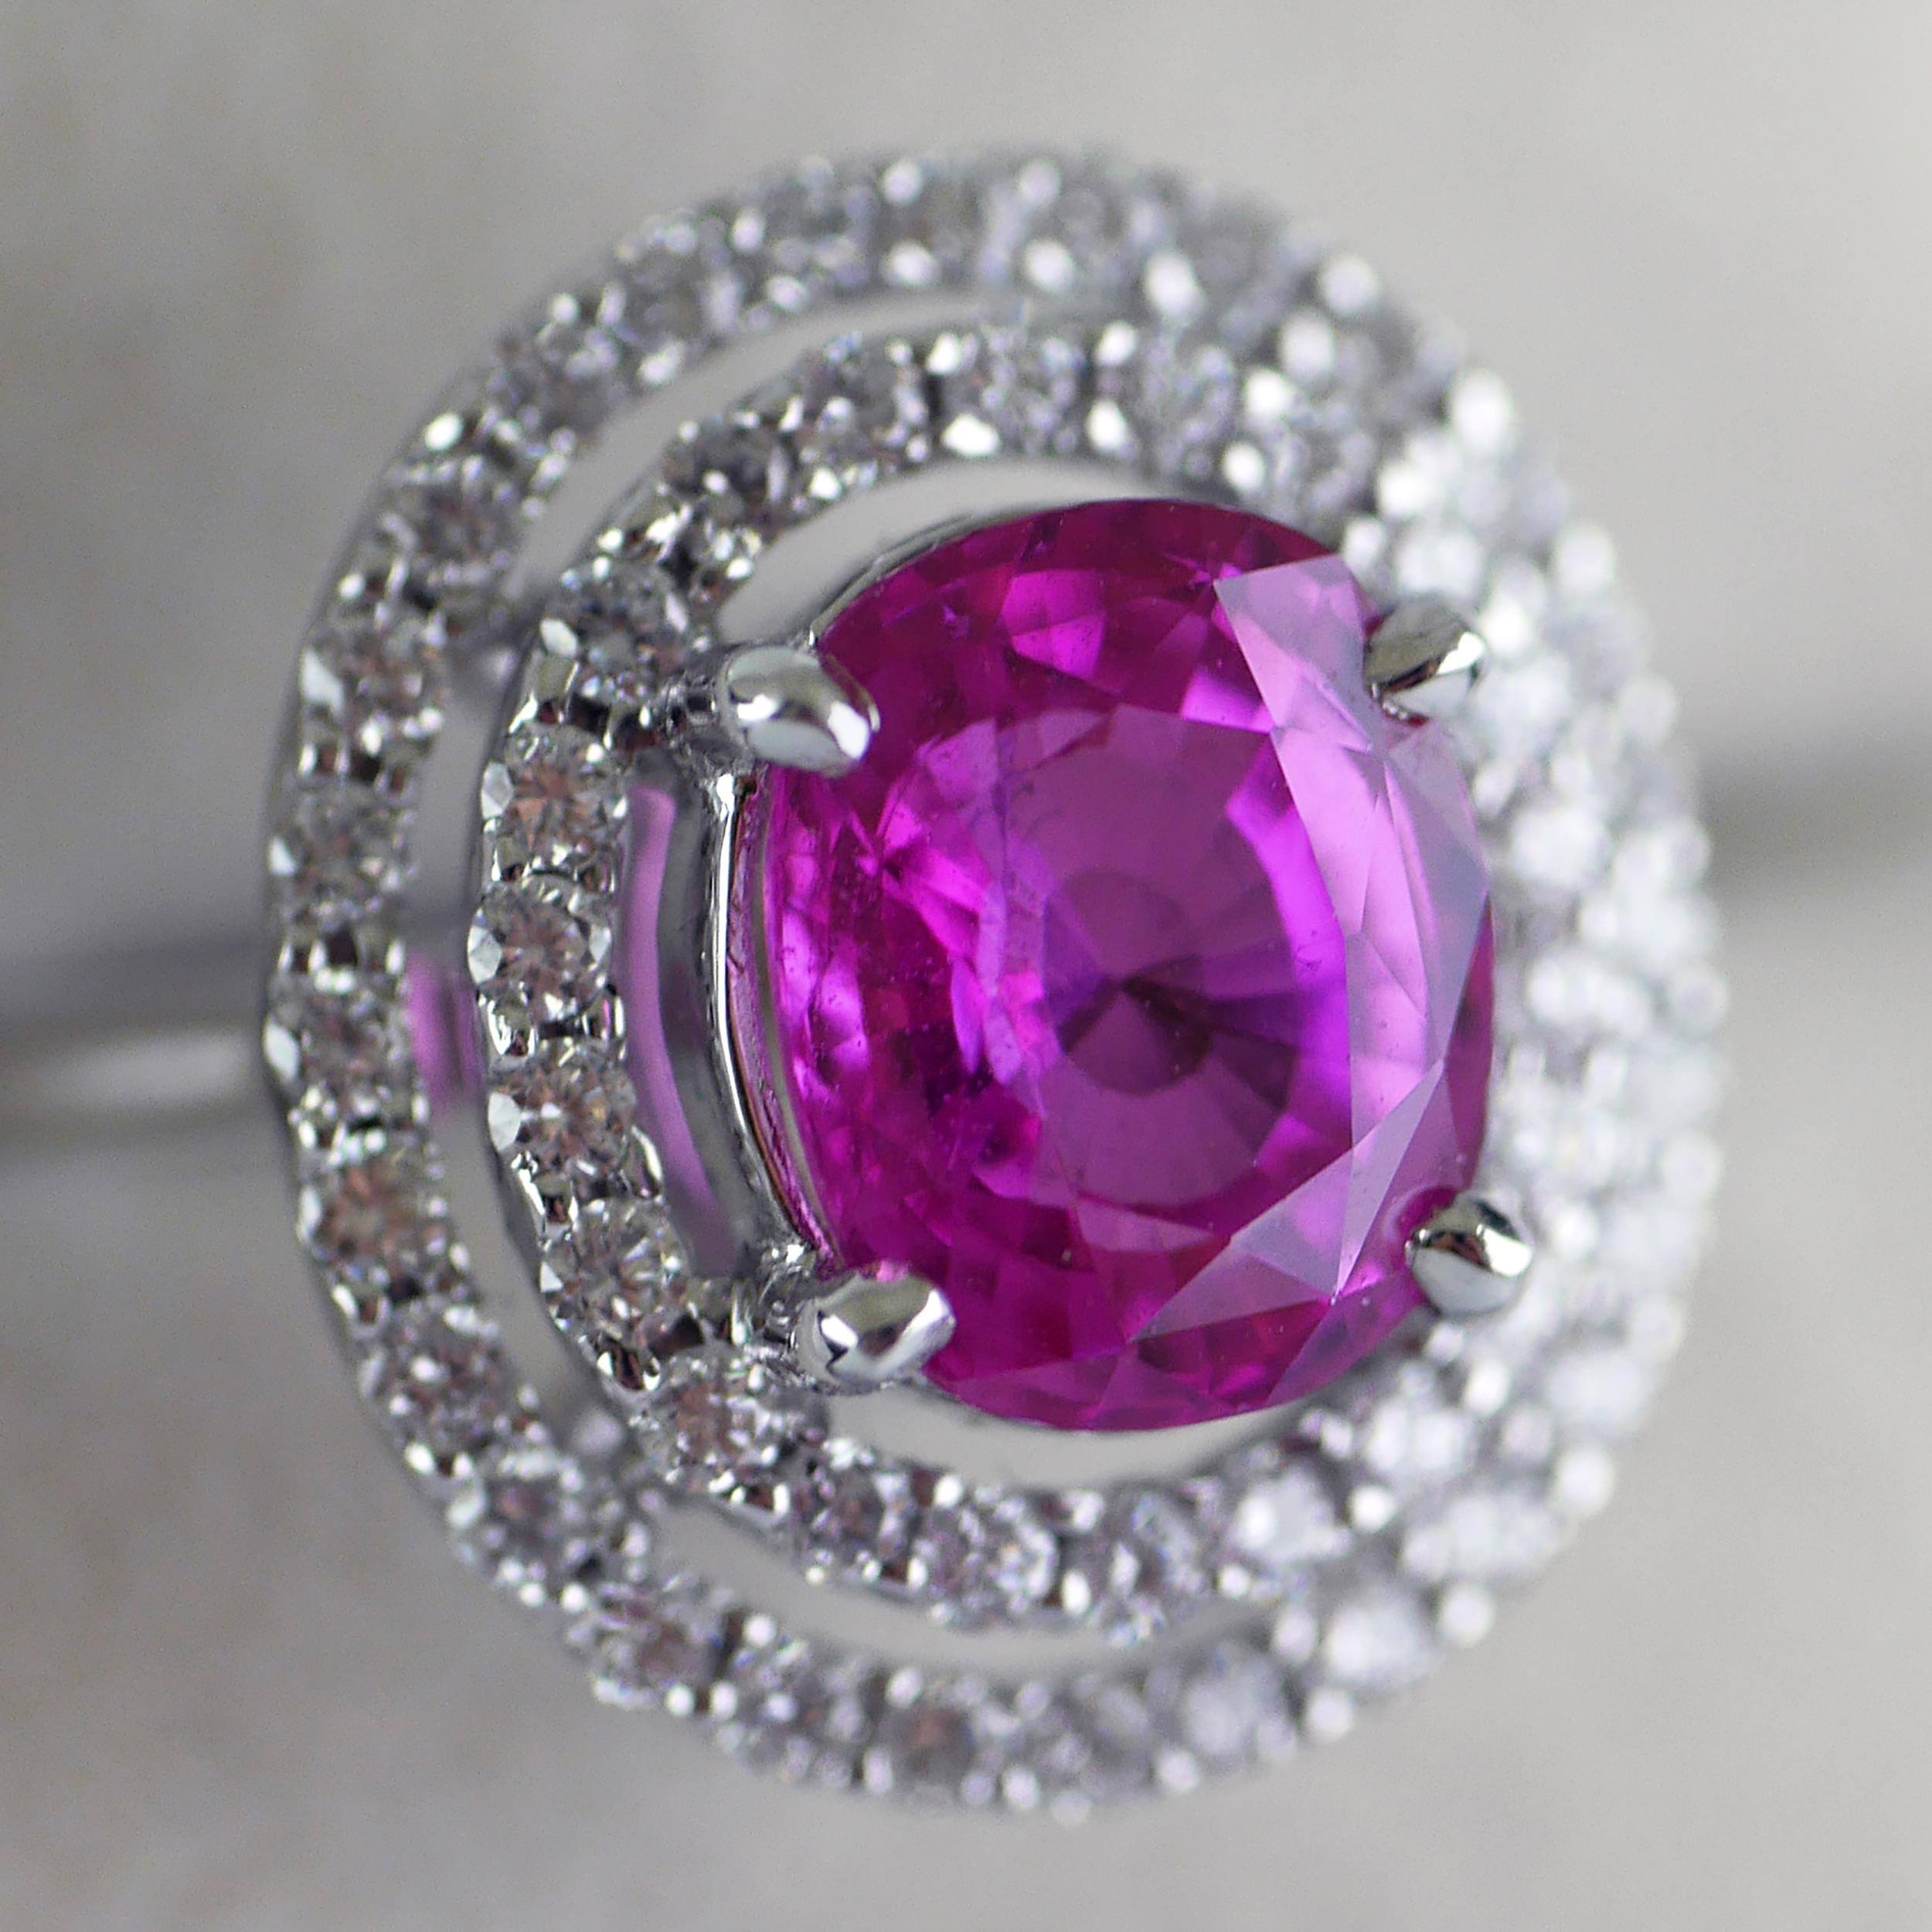 Vintage ring with a natural, untreated, pink sapphire, handmade in England, circa 1970.

Central Madagasgar pink sapphire, cushion cut, weighing 2.91ct, certified, natural untreated colour. 

The sapphire surrounded by round brilliant cut diamonds,